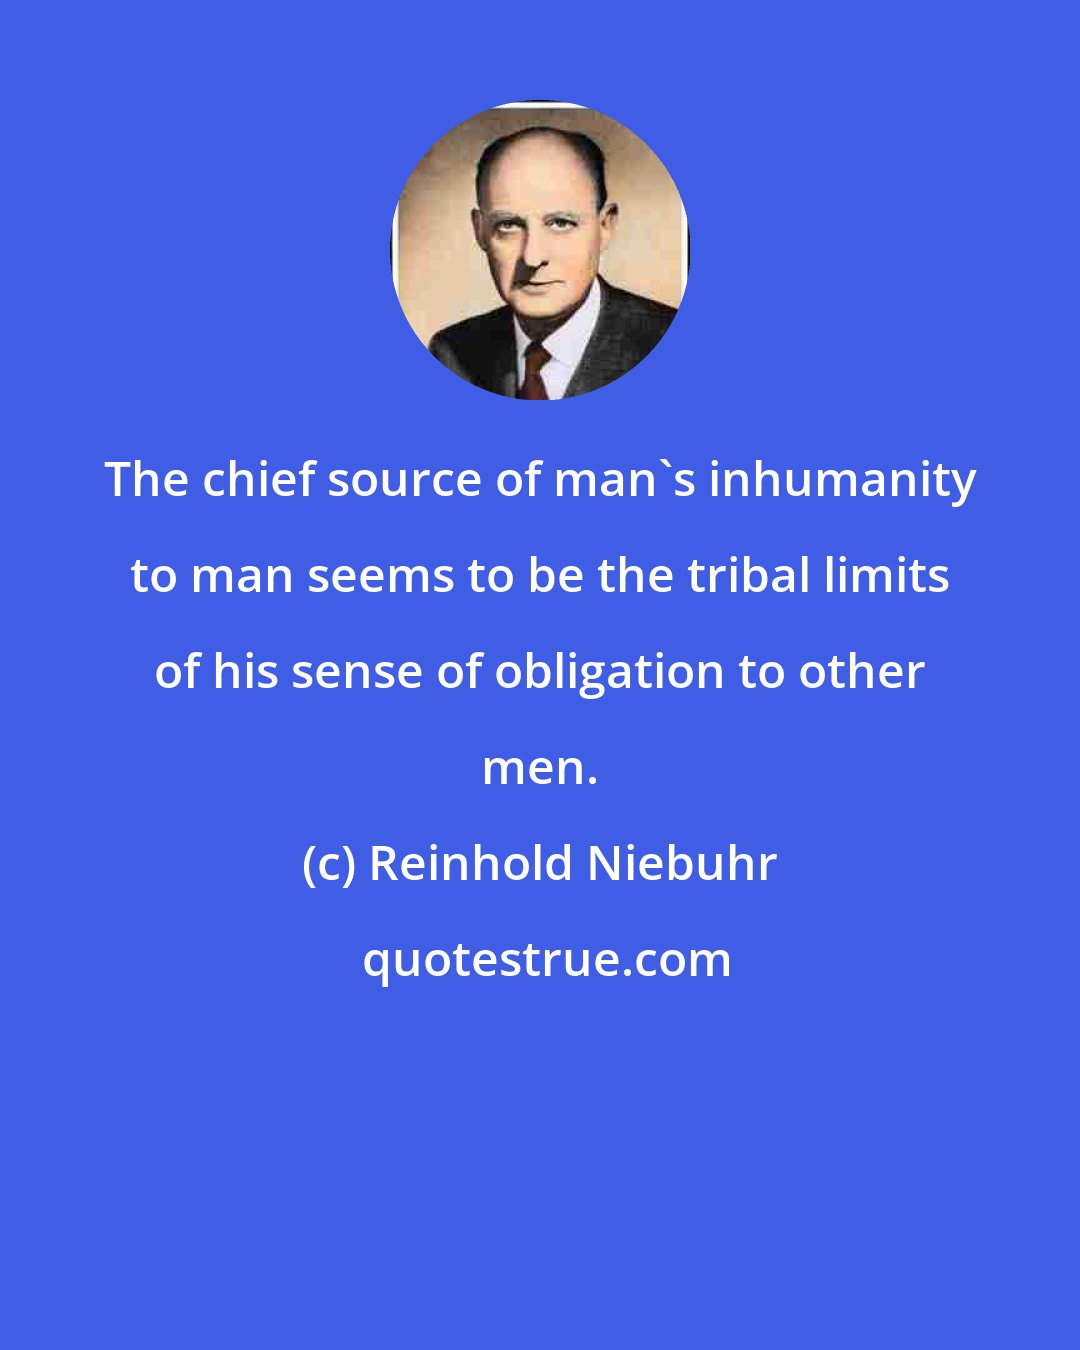 Reinhold Niebuhr: The chief source of man's inhumanity to man seems to be the tribal limits of his sense of obligation to other men.